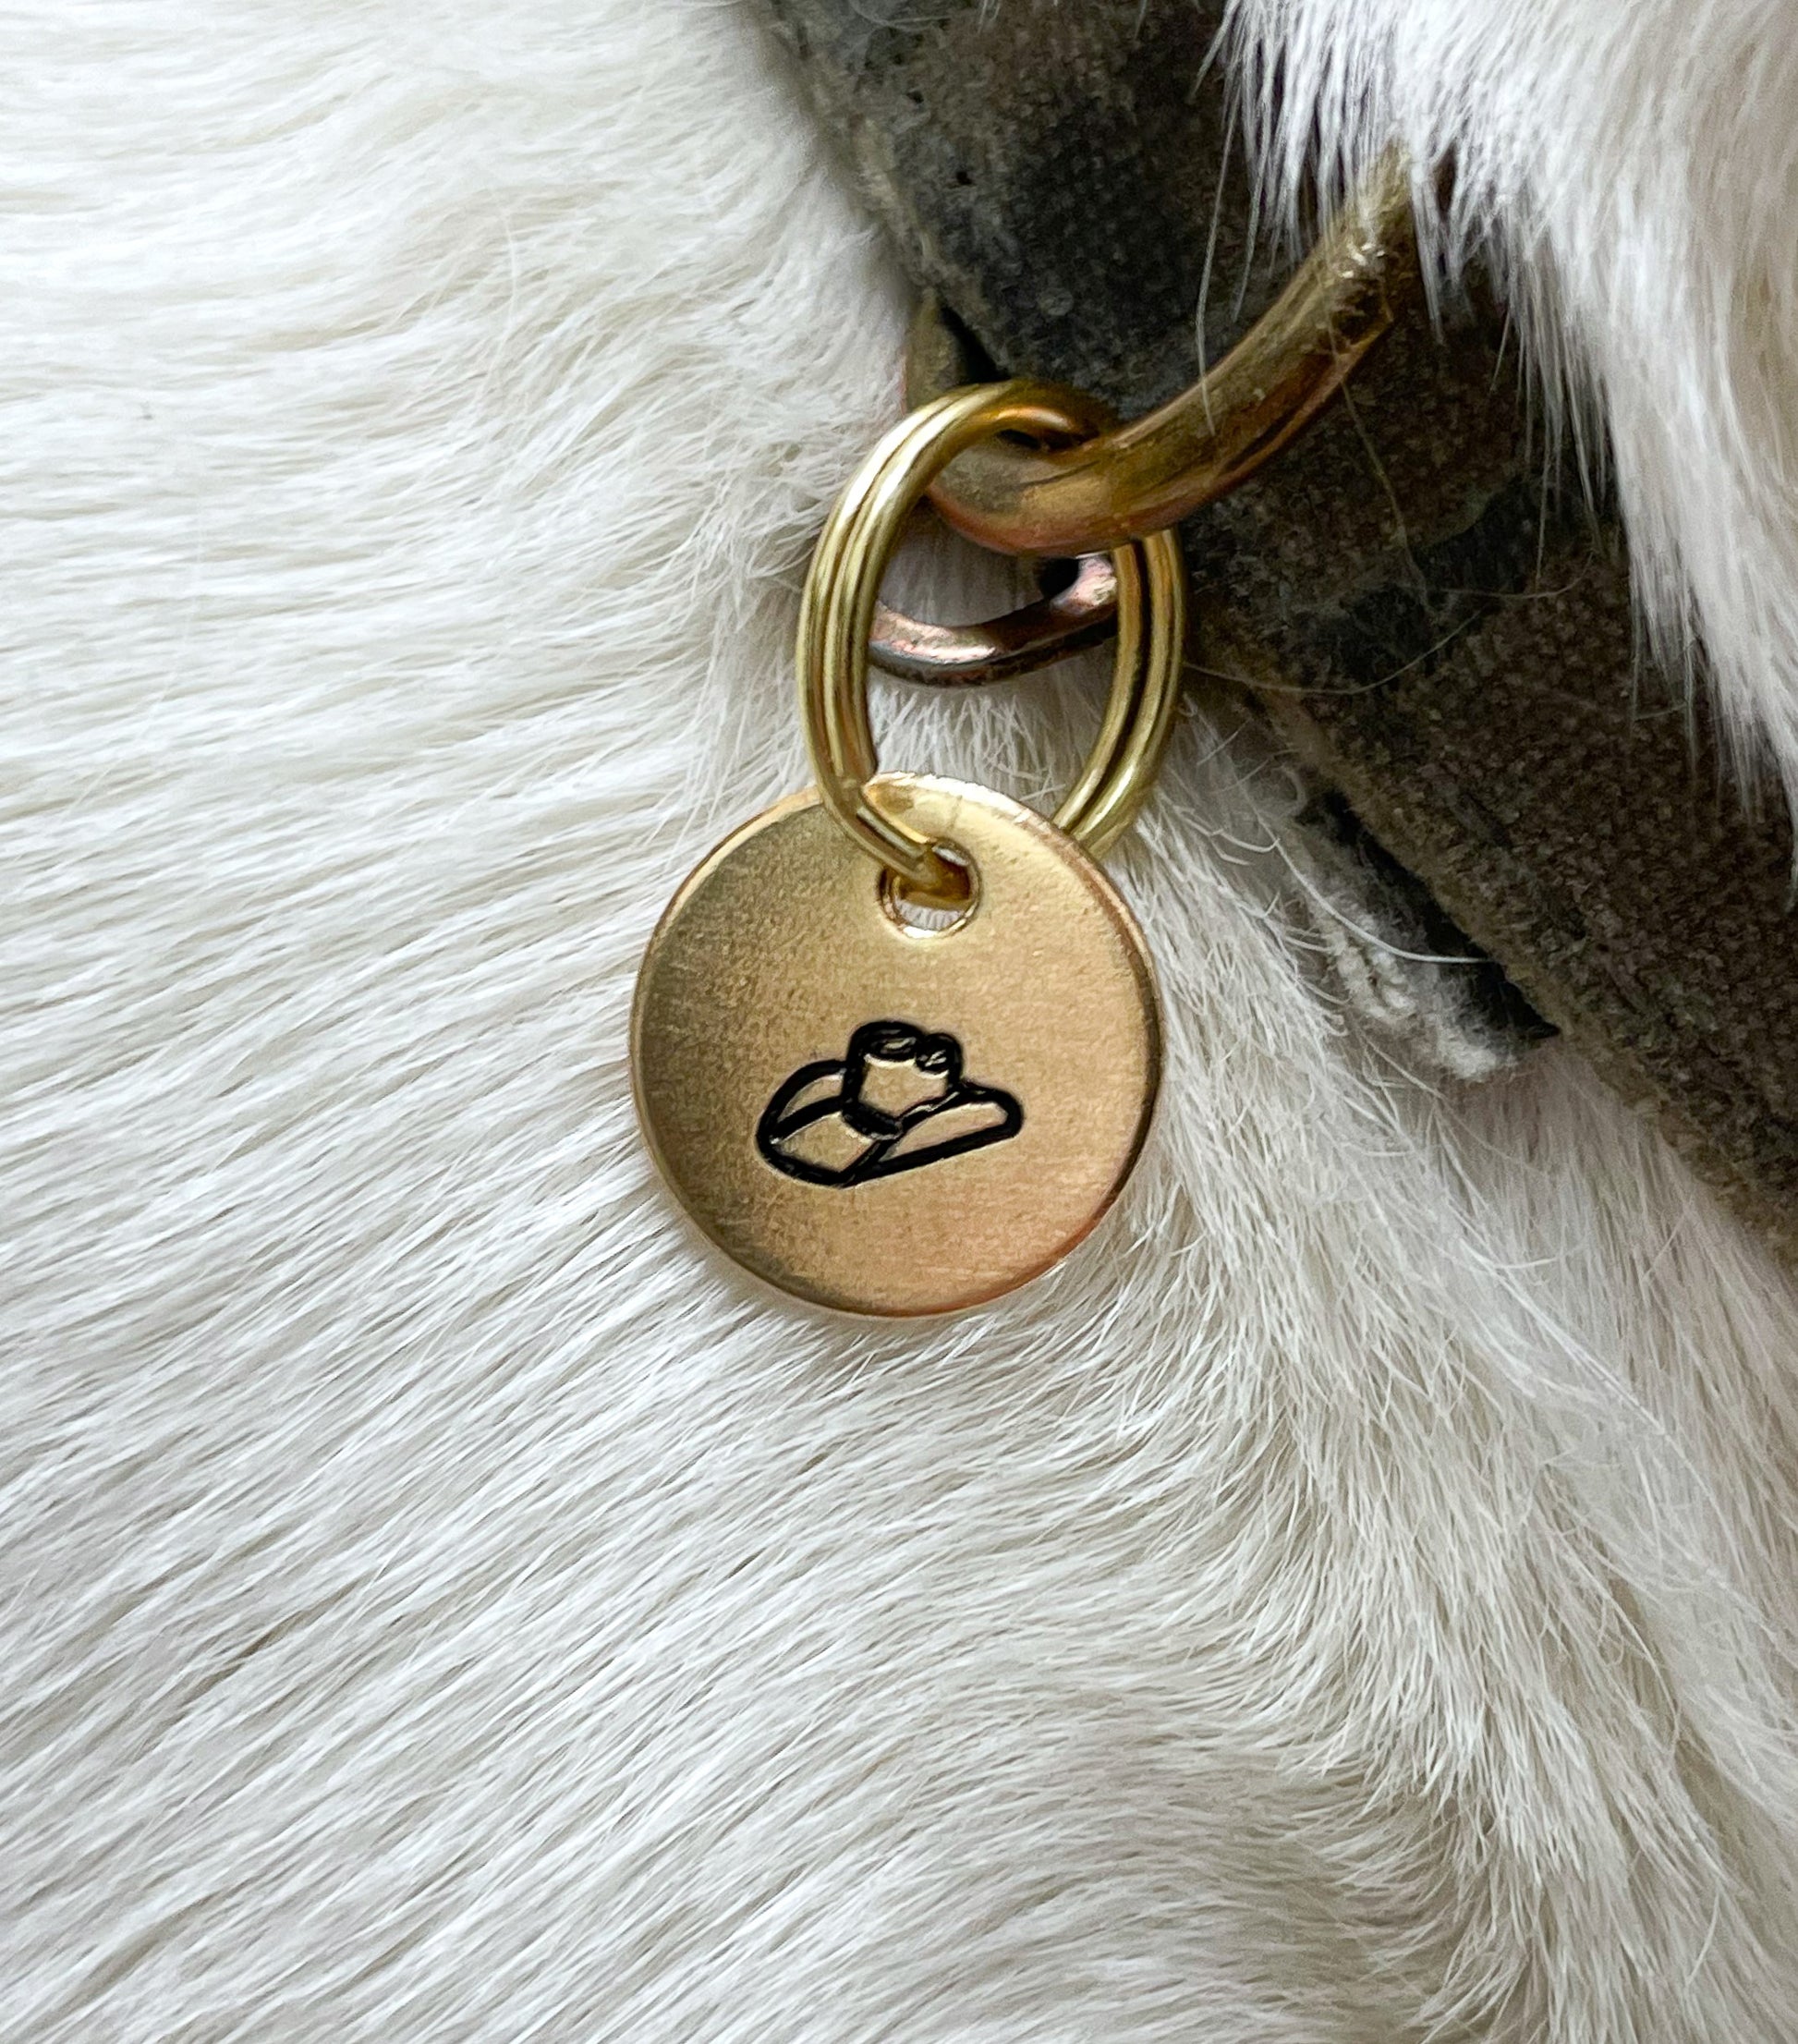 Dog Collar Charm Engraved Tag - Cowboy Hat - Cat Collar Charm - Yellowstone - Gift for Dog Lover - Mini Tag - Collar Charms Dog - Small Tag - Western Dog - Western Themed - Country Themed